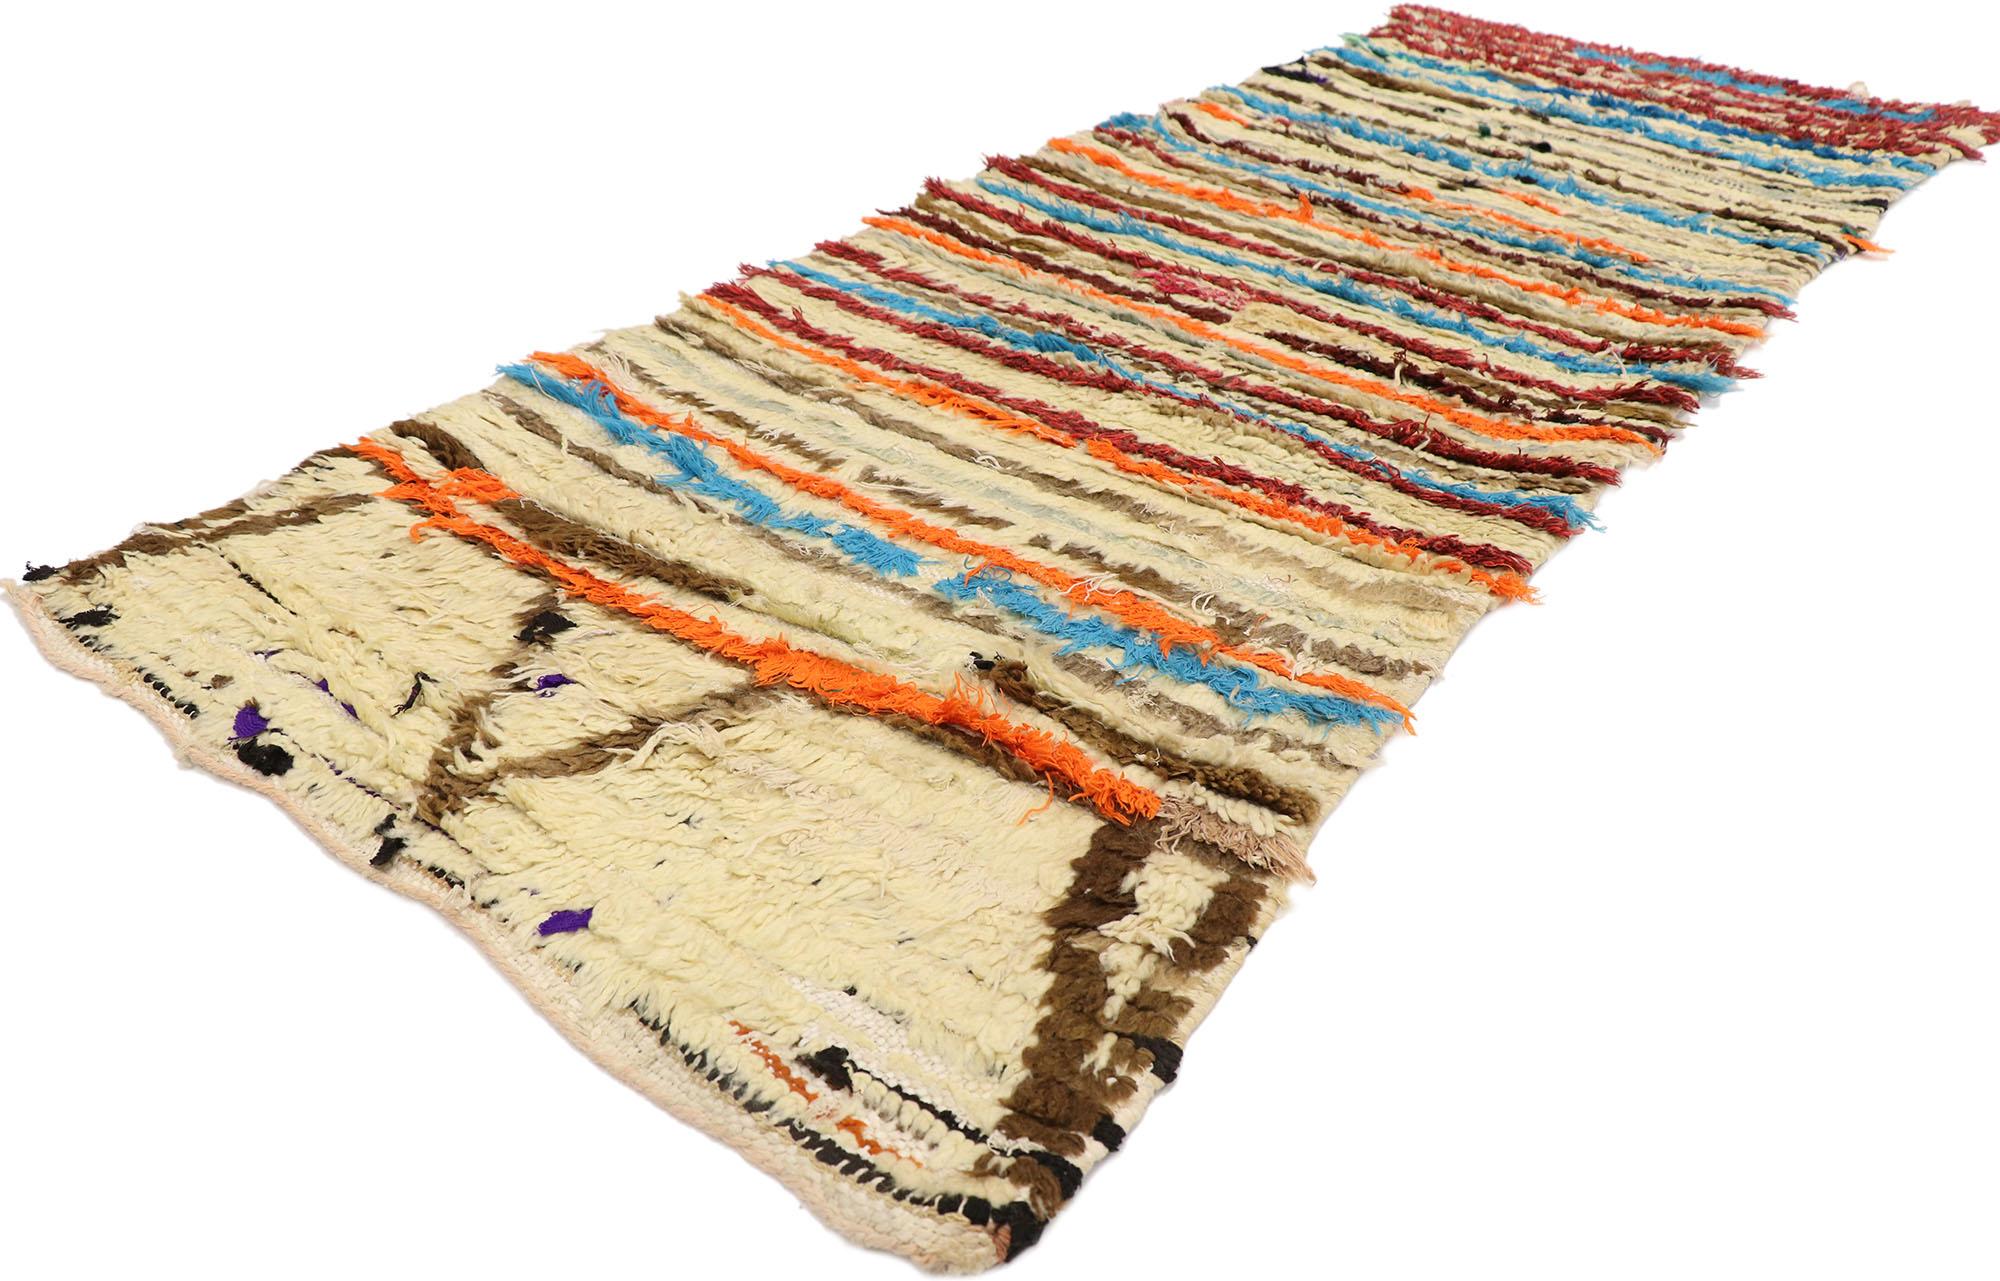 21558 Vintage Berber Moroccan Azilal rug with Tribal Style 02'04 x 06'03. Showcasing an abstract linear design, incredible detail and texture, this hand knotted cotton and wool vintage Berber Moroccan Azilal rug is a captivating vision of woven